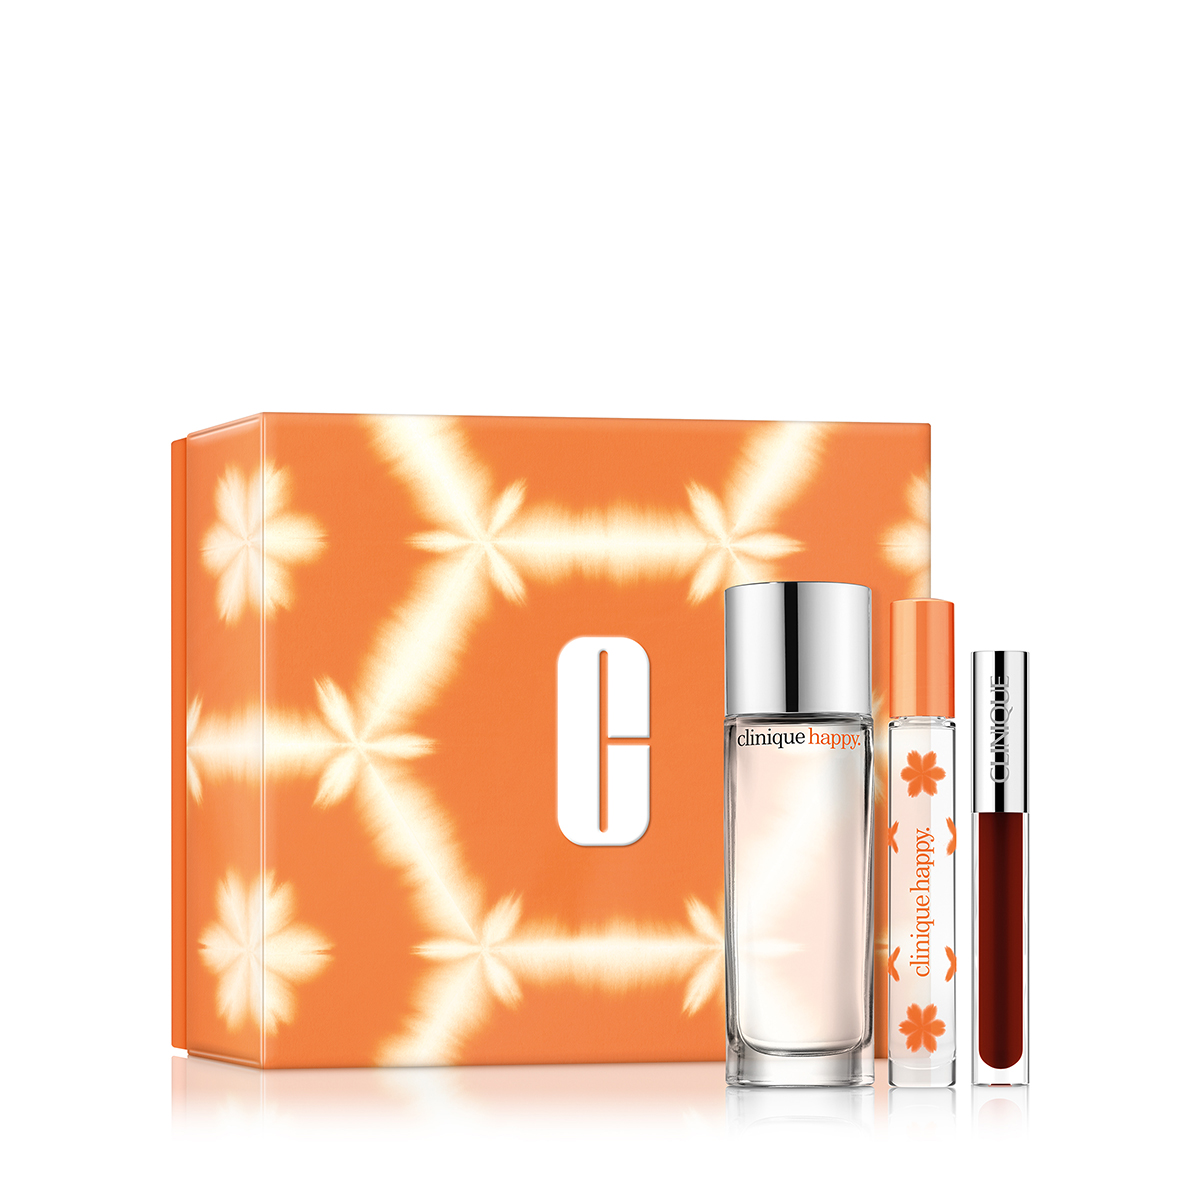 Clinique Perfectly Happy(tm) Fragrance + Lip Gloss Set - $125 Value